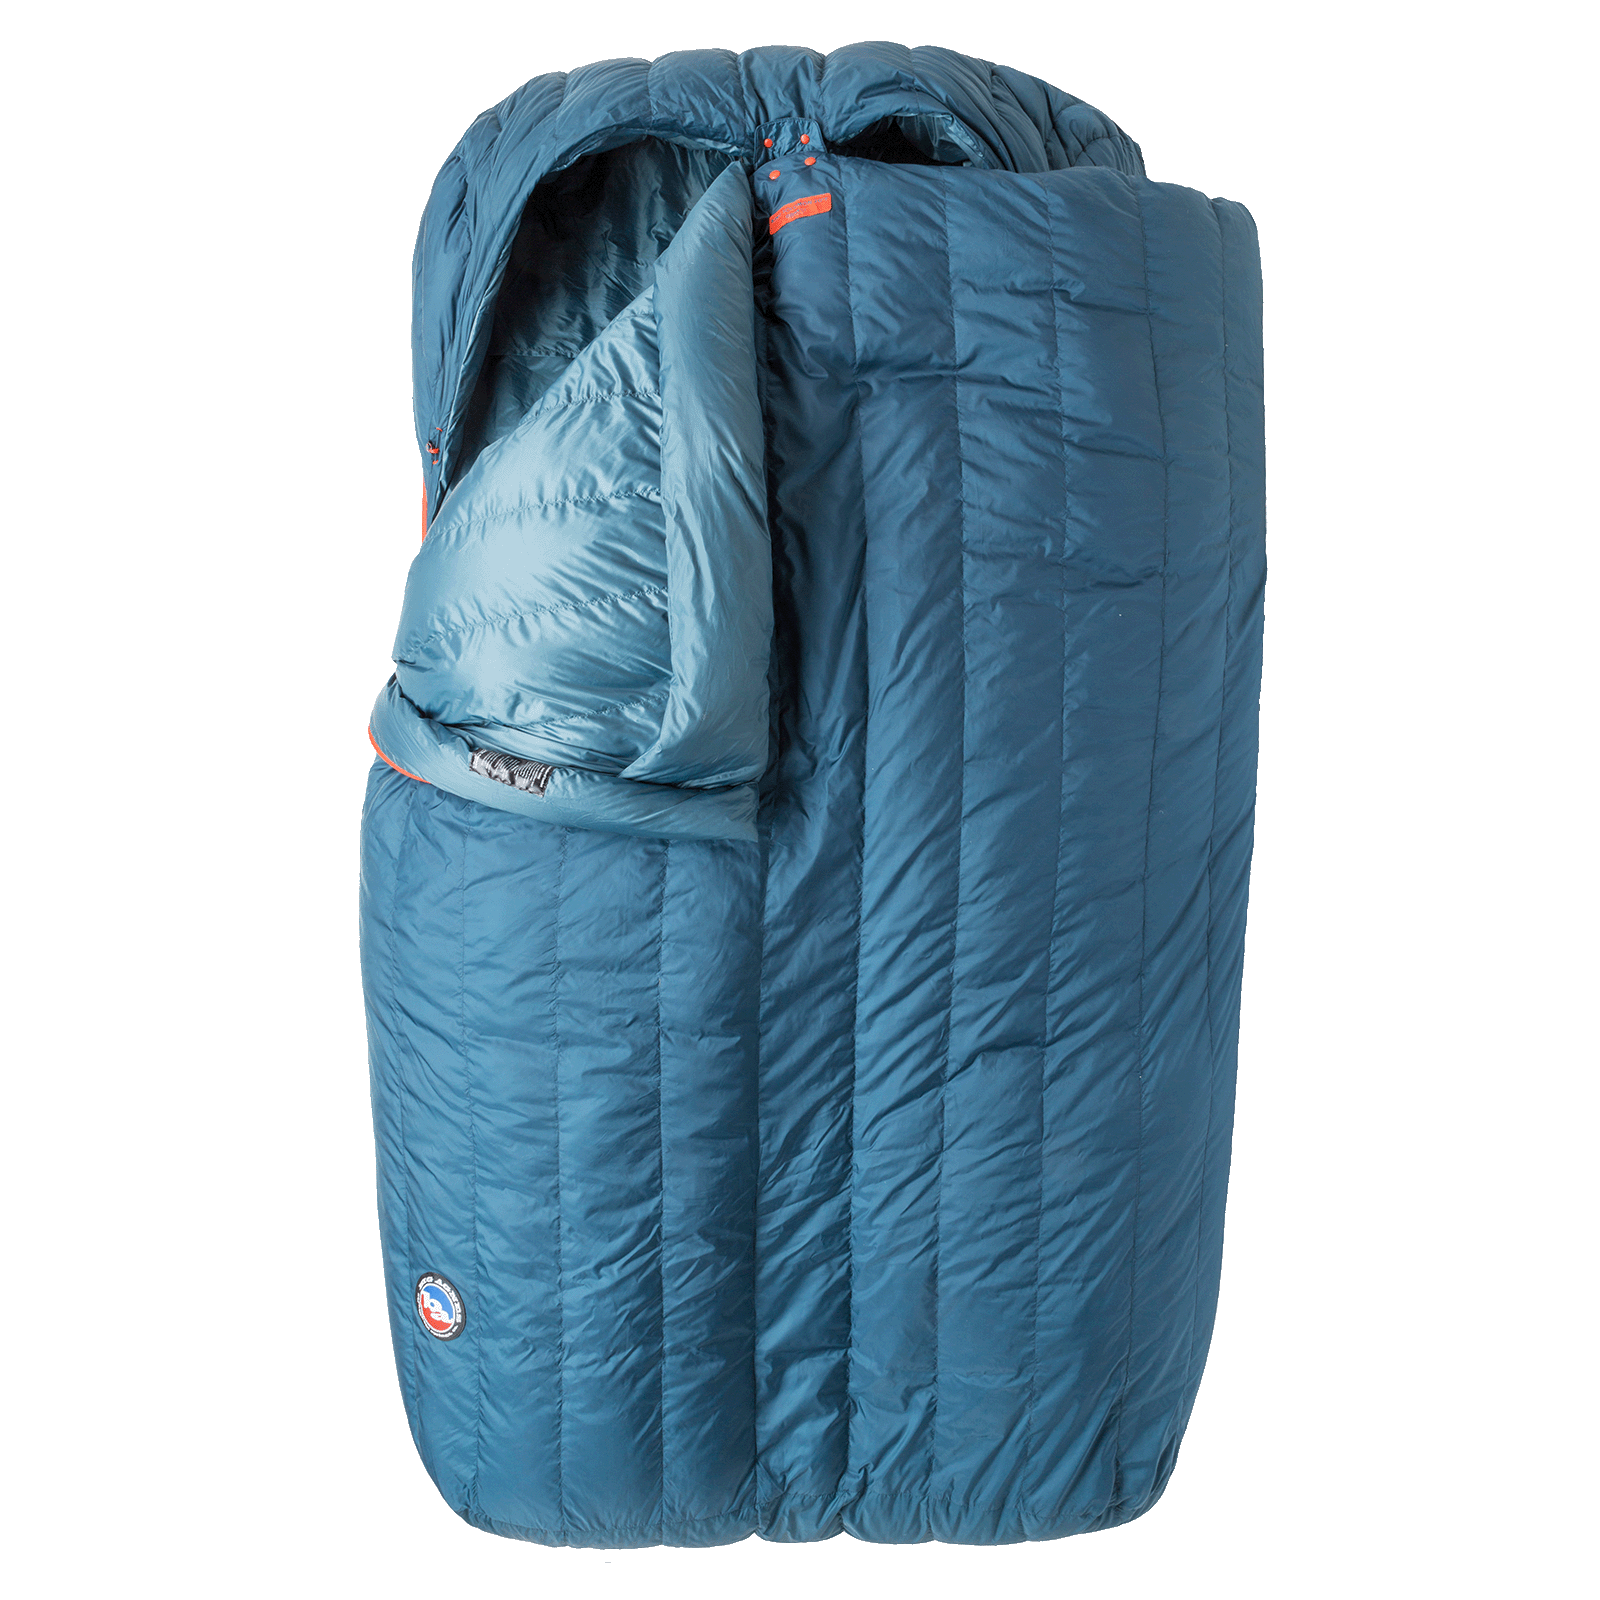 Laundry Bag XXL for travelbags 50 x 80 cm